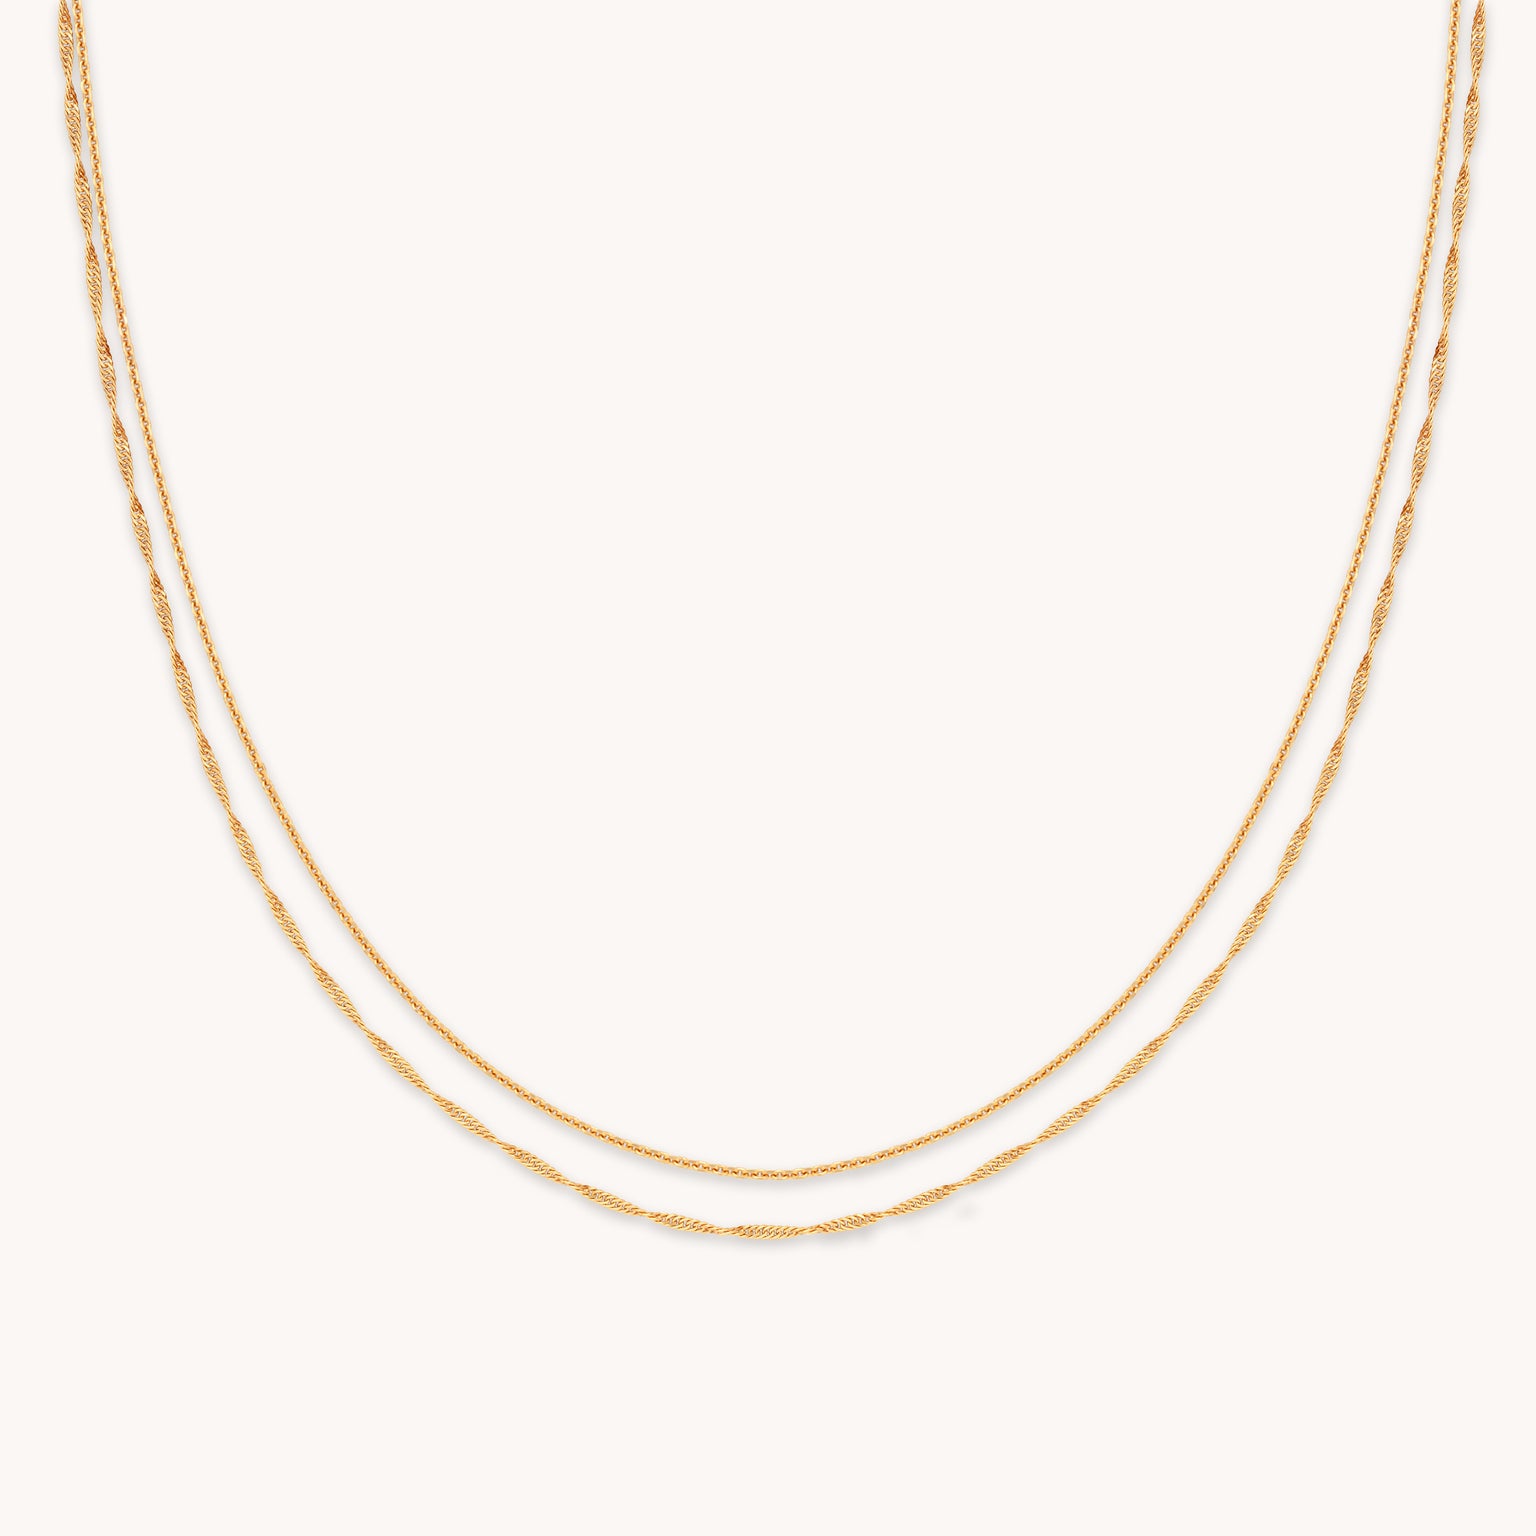 Illusion Twist Double Chain Necklace in Gold